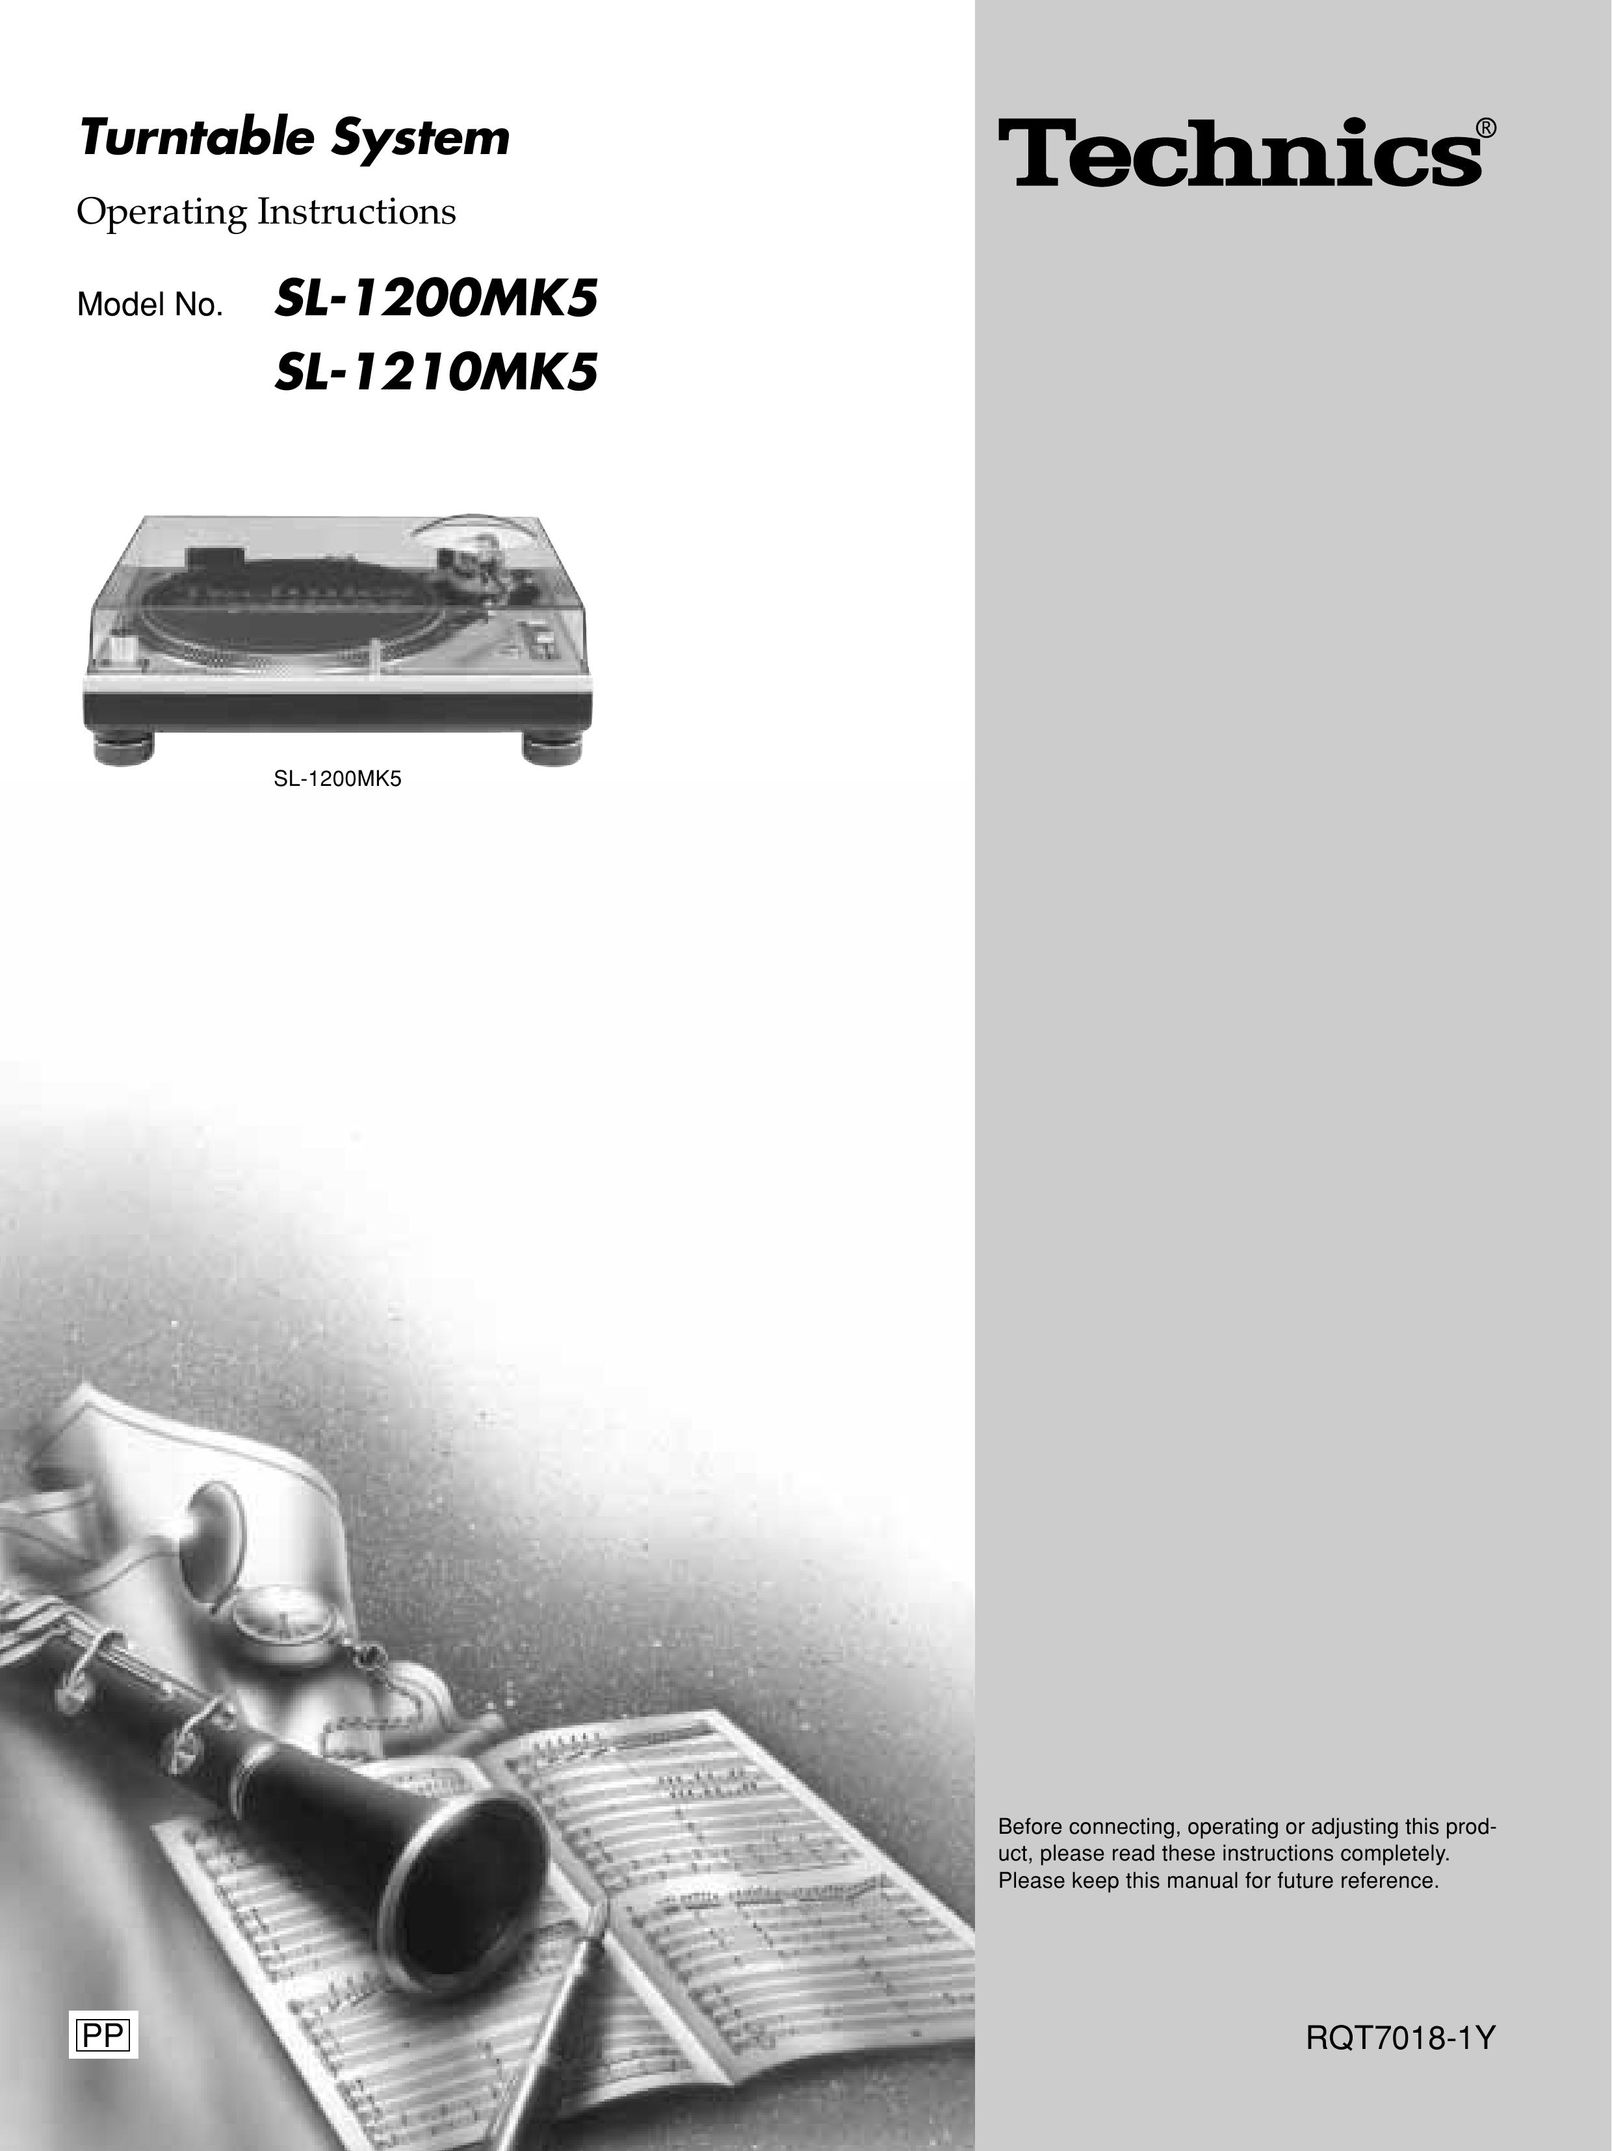 Technics RQT7018-1Y Turntable User Manual